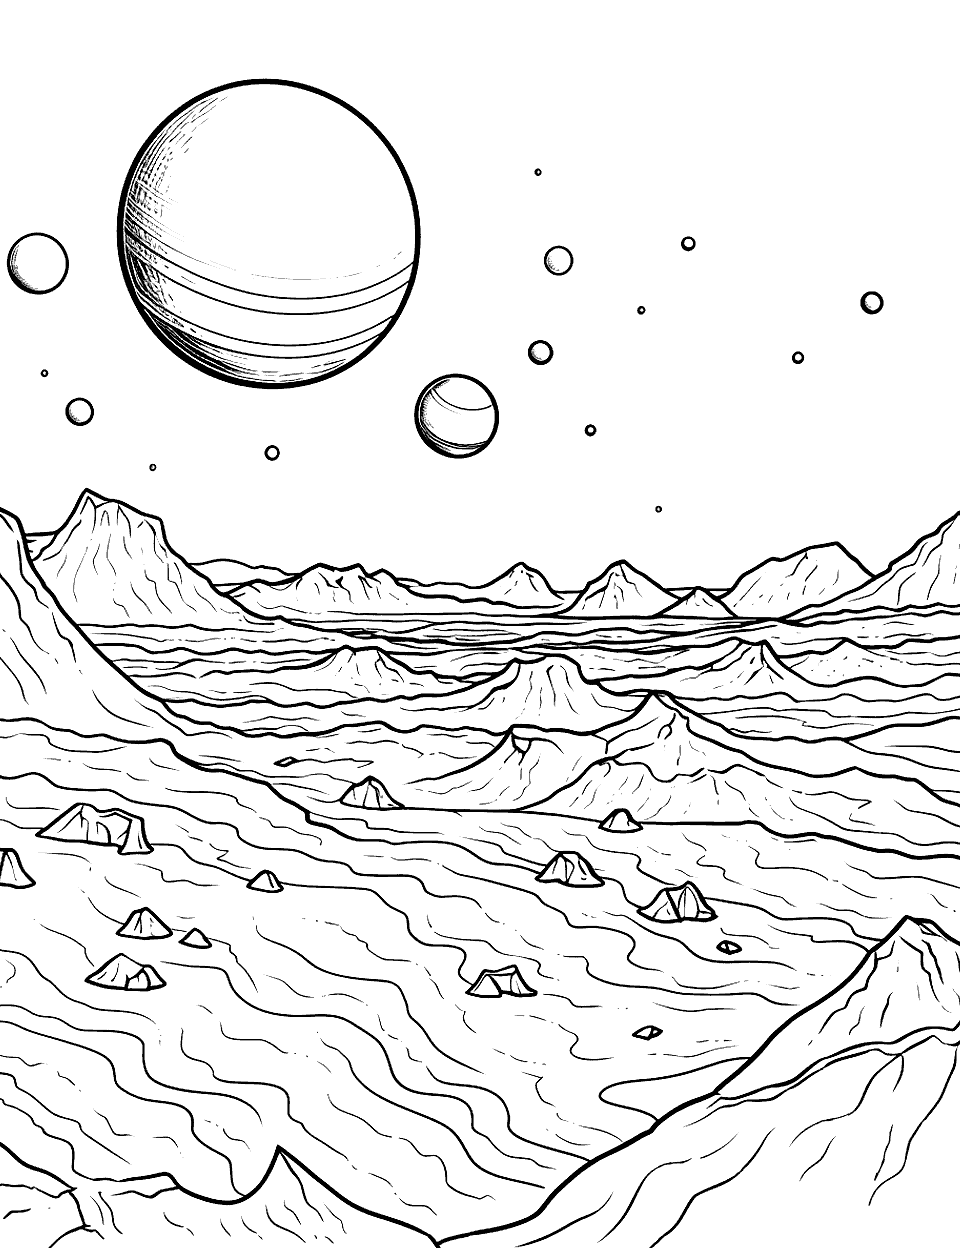 Mars' Red Landscape Solar System Coloring Page - The red, rocky surface of Mars, with a distant view of Olympus Mons.